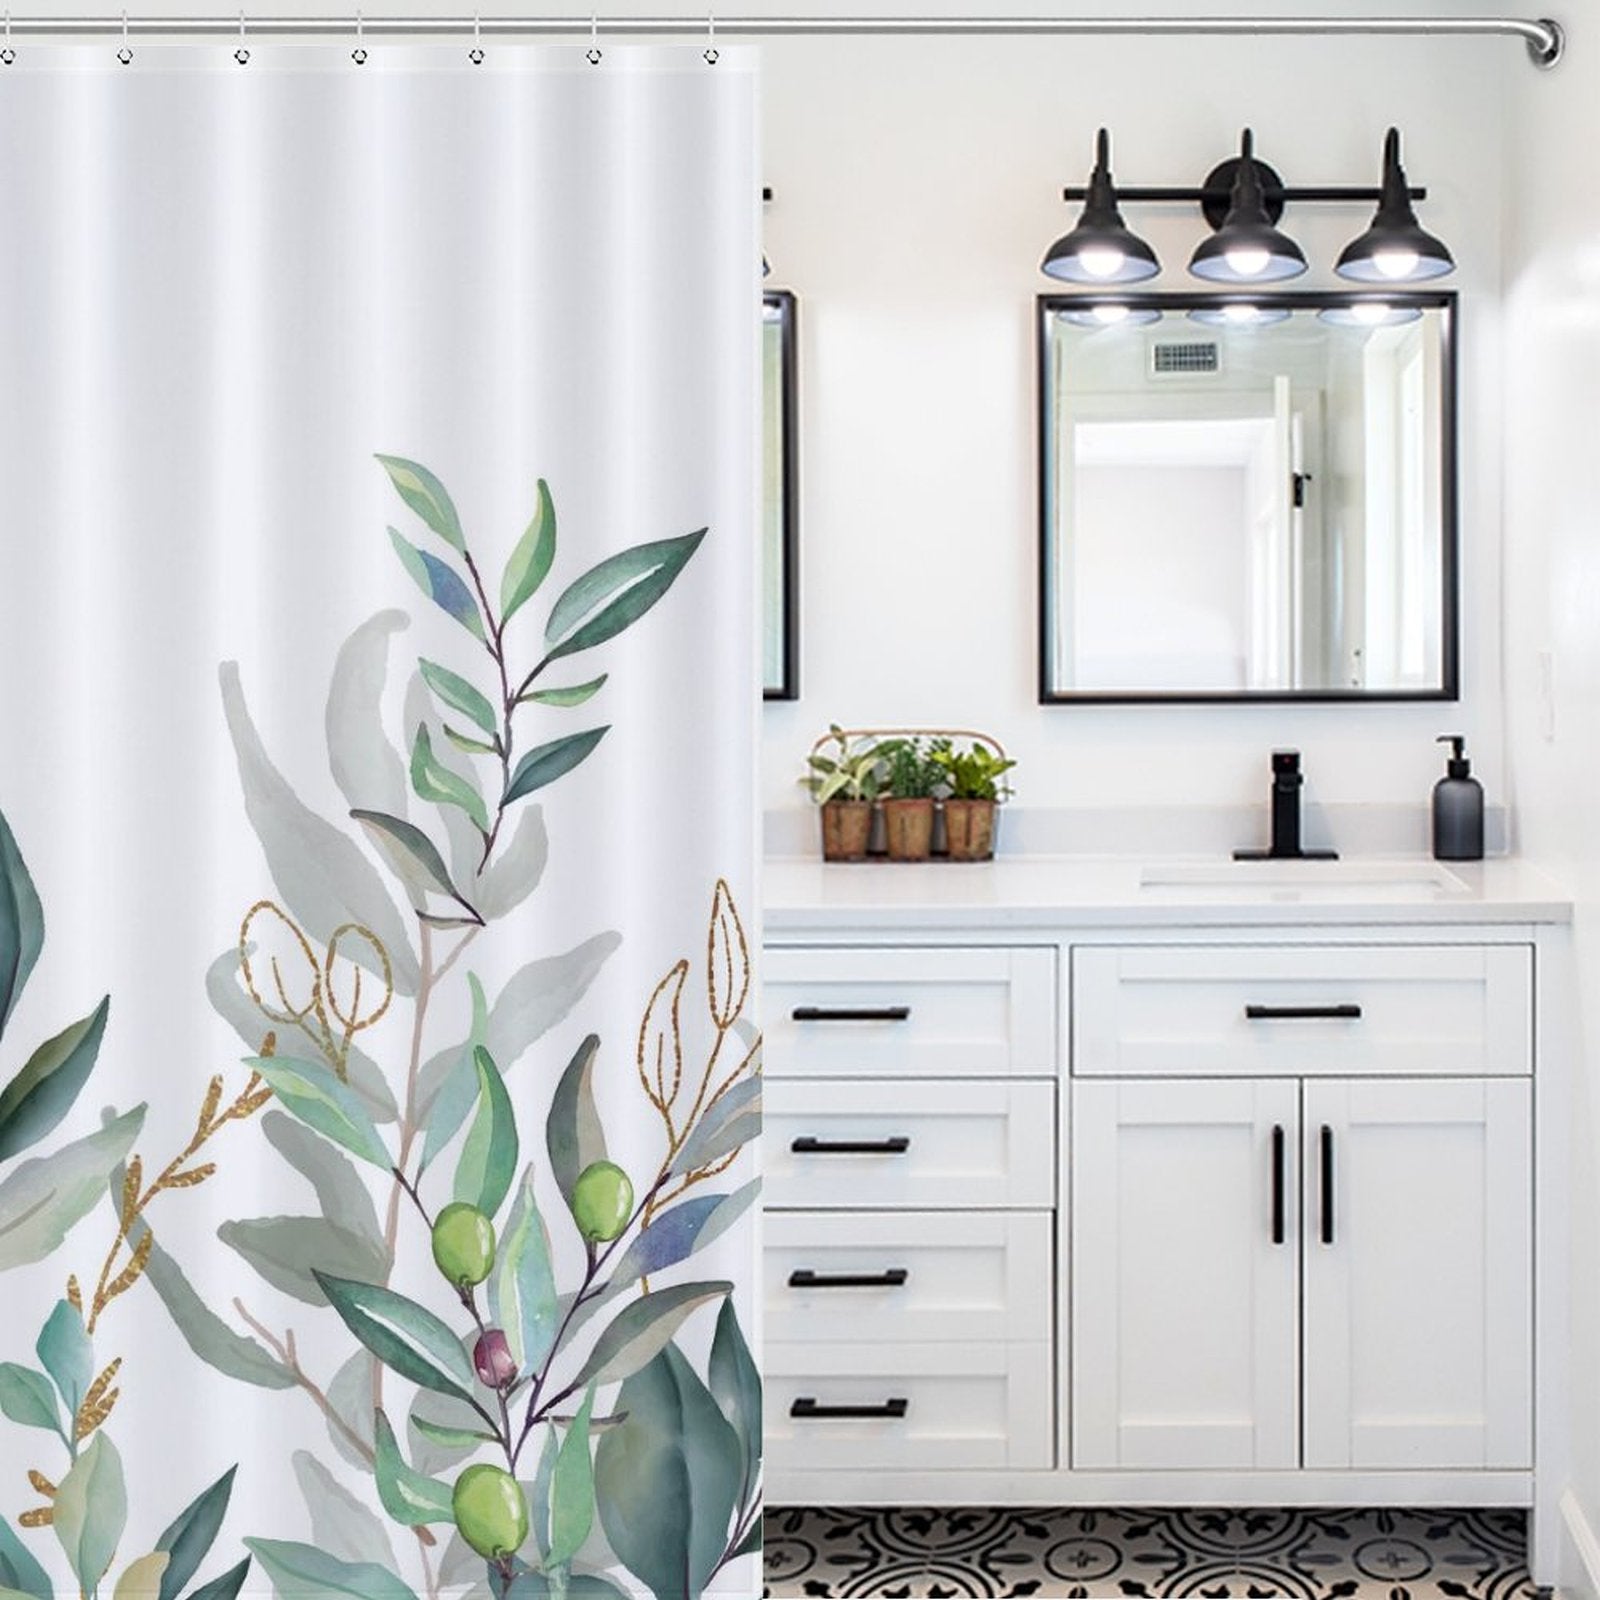 Bathroom with white cabinetry, double sinks, black fixtures, and a patterned tile floor. A Watercolor Sage Green Eucalyptus Botanical Leaves Shower Curtain-Cottoncat by Cotton Cat partially covers the shower area.